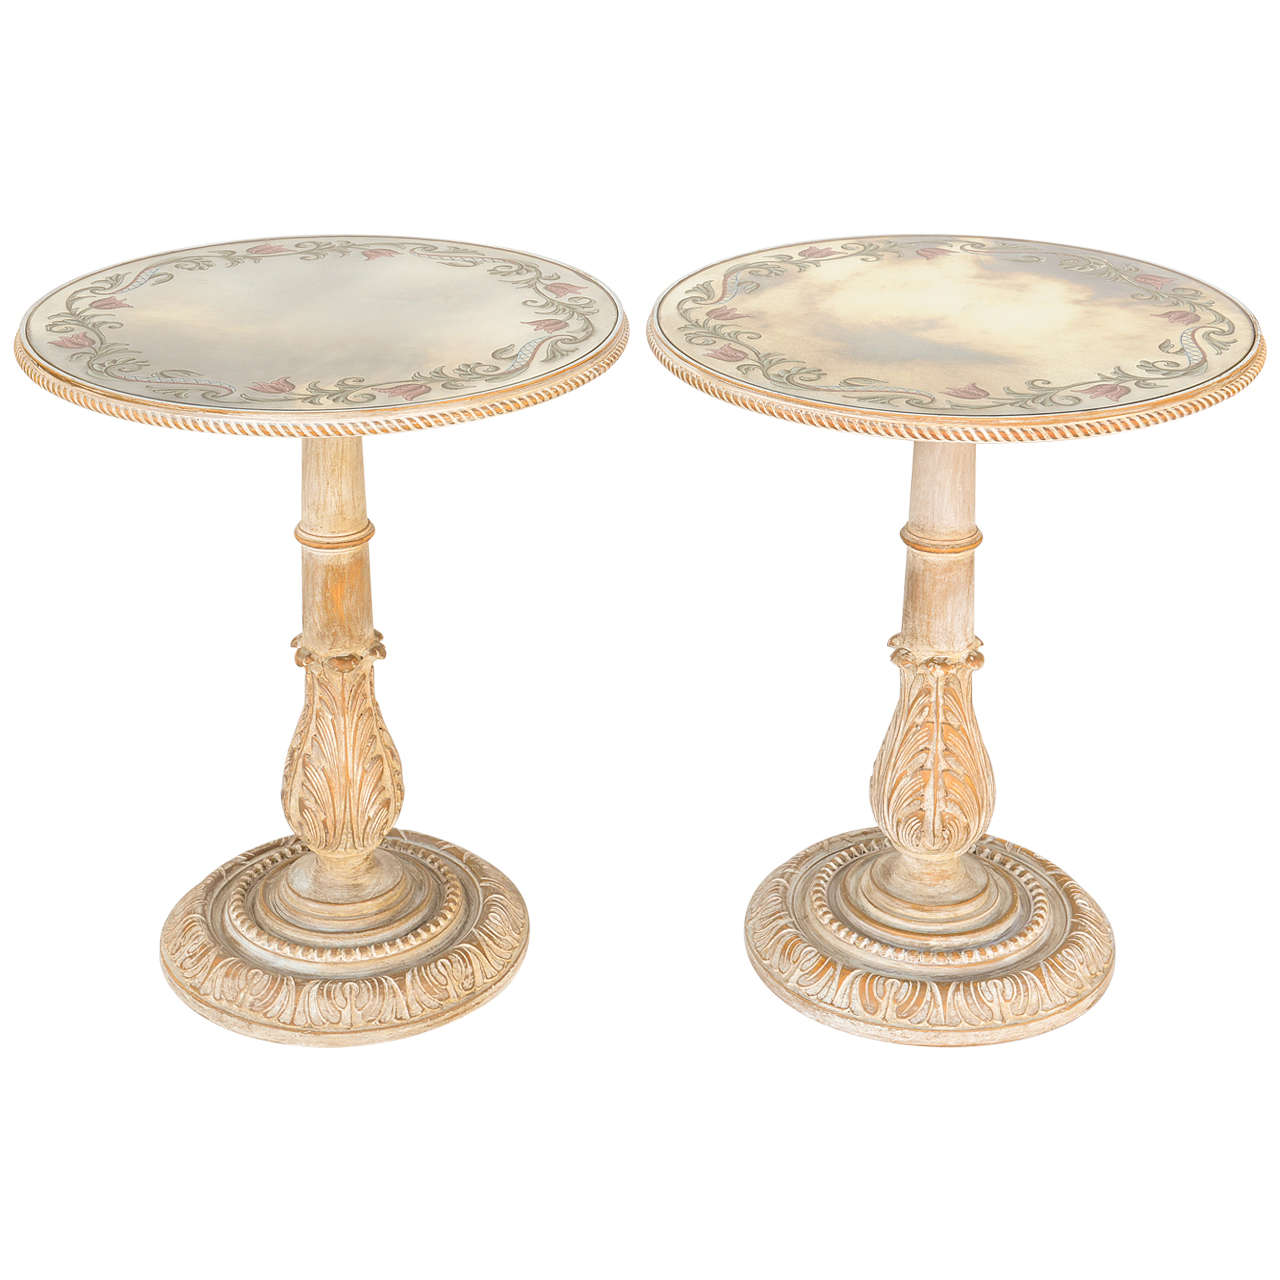 Pair of Italian End Tables with Eglomise Mirrored Tops